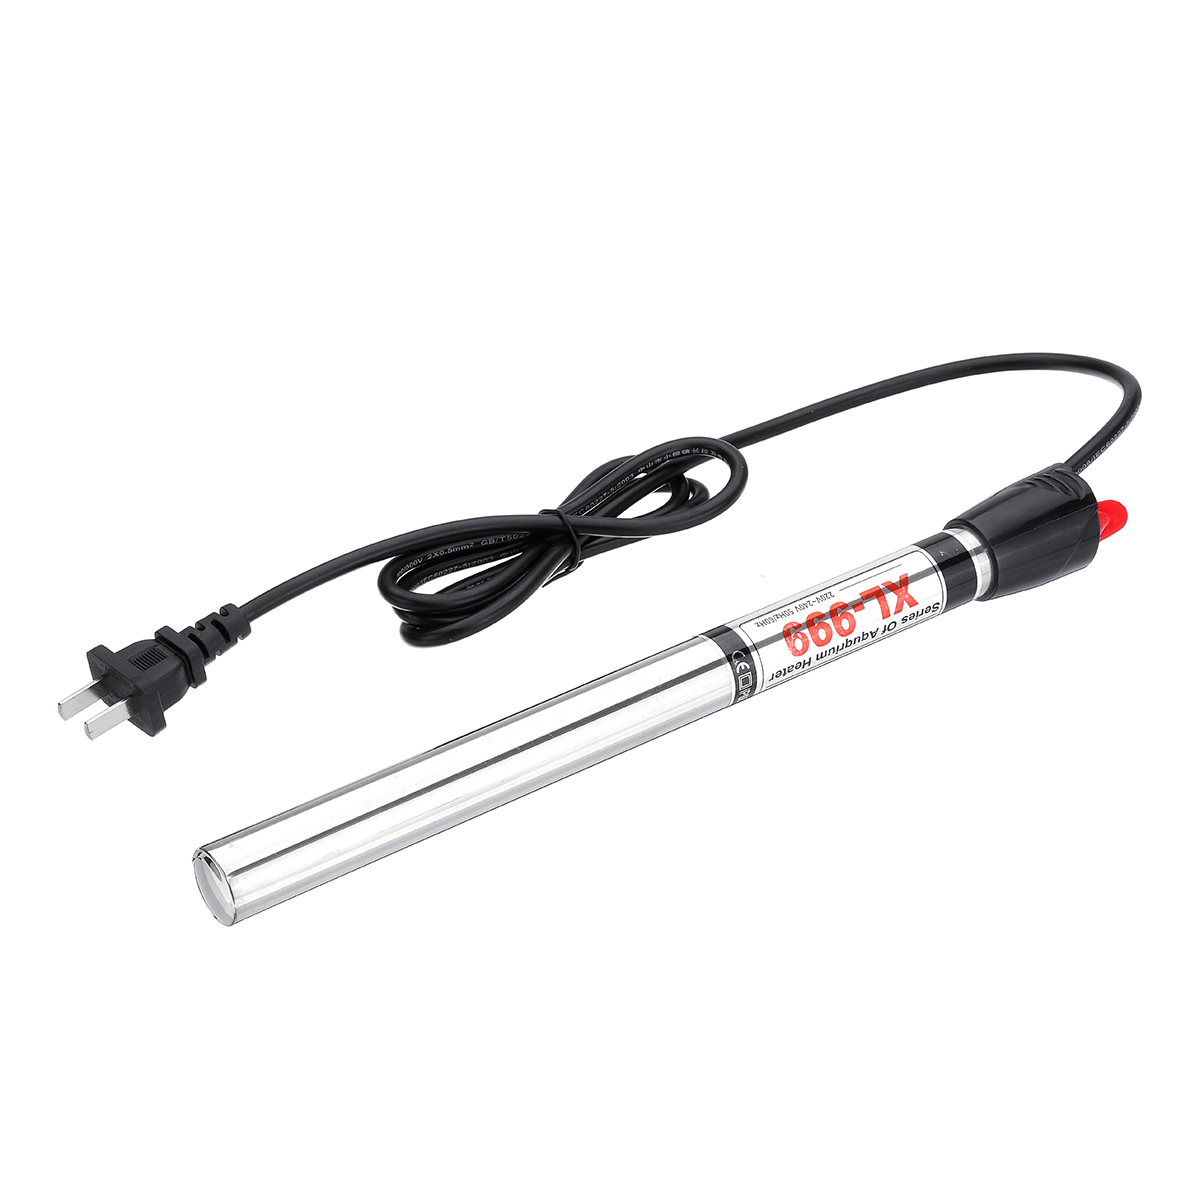 100W200W-Submersible-Stainless-Steel-Water-Heater-Rod-Aquarium-Fish-Tank-220V-1478945-2